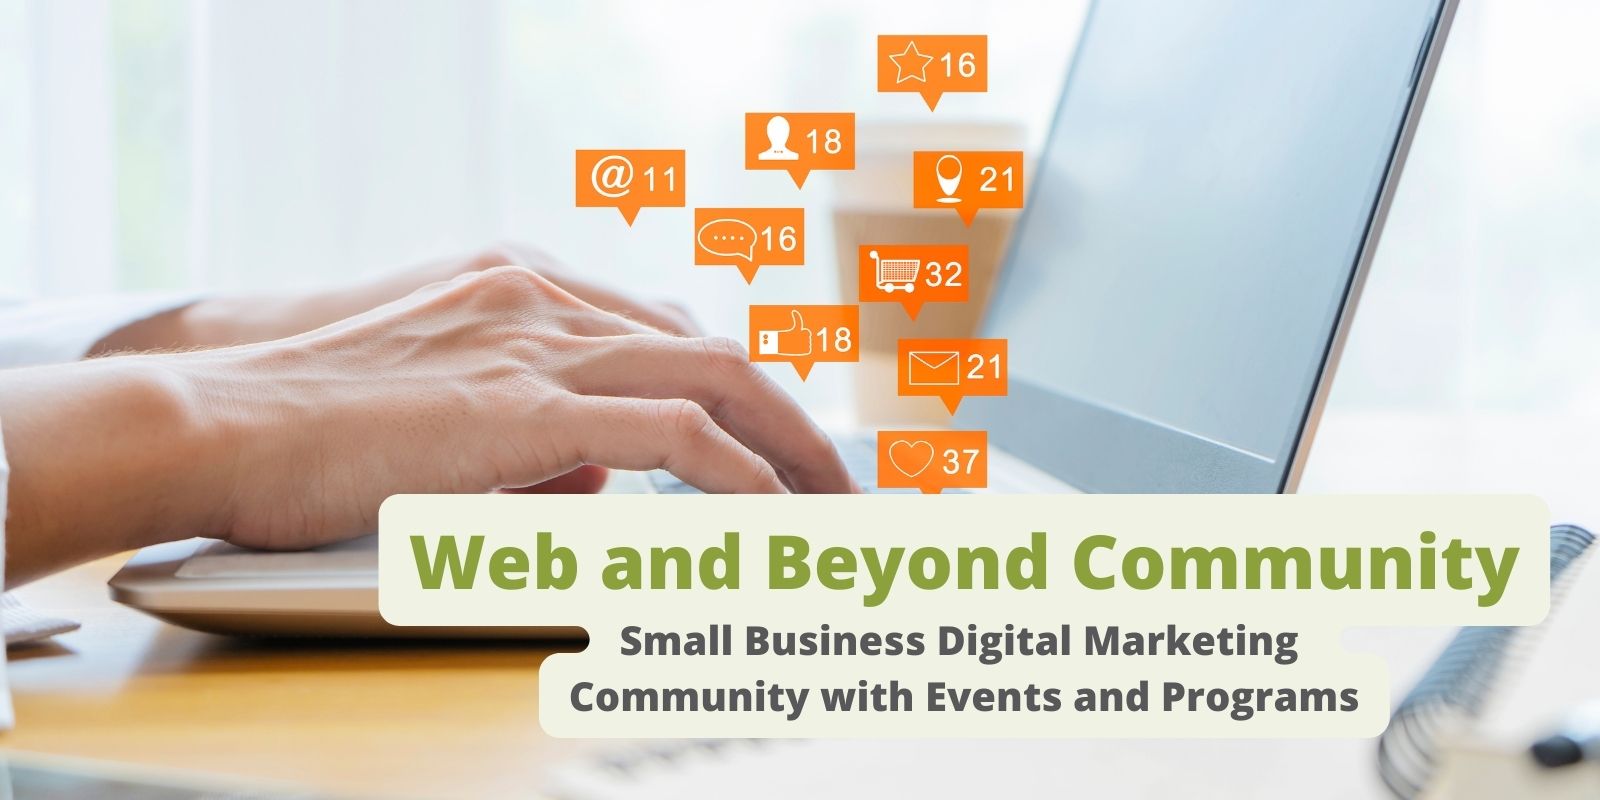 Web and Beyond Community